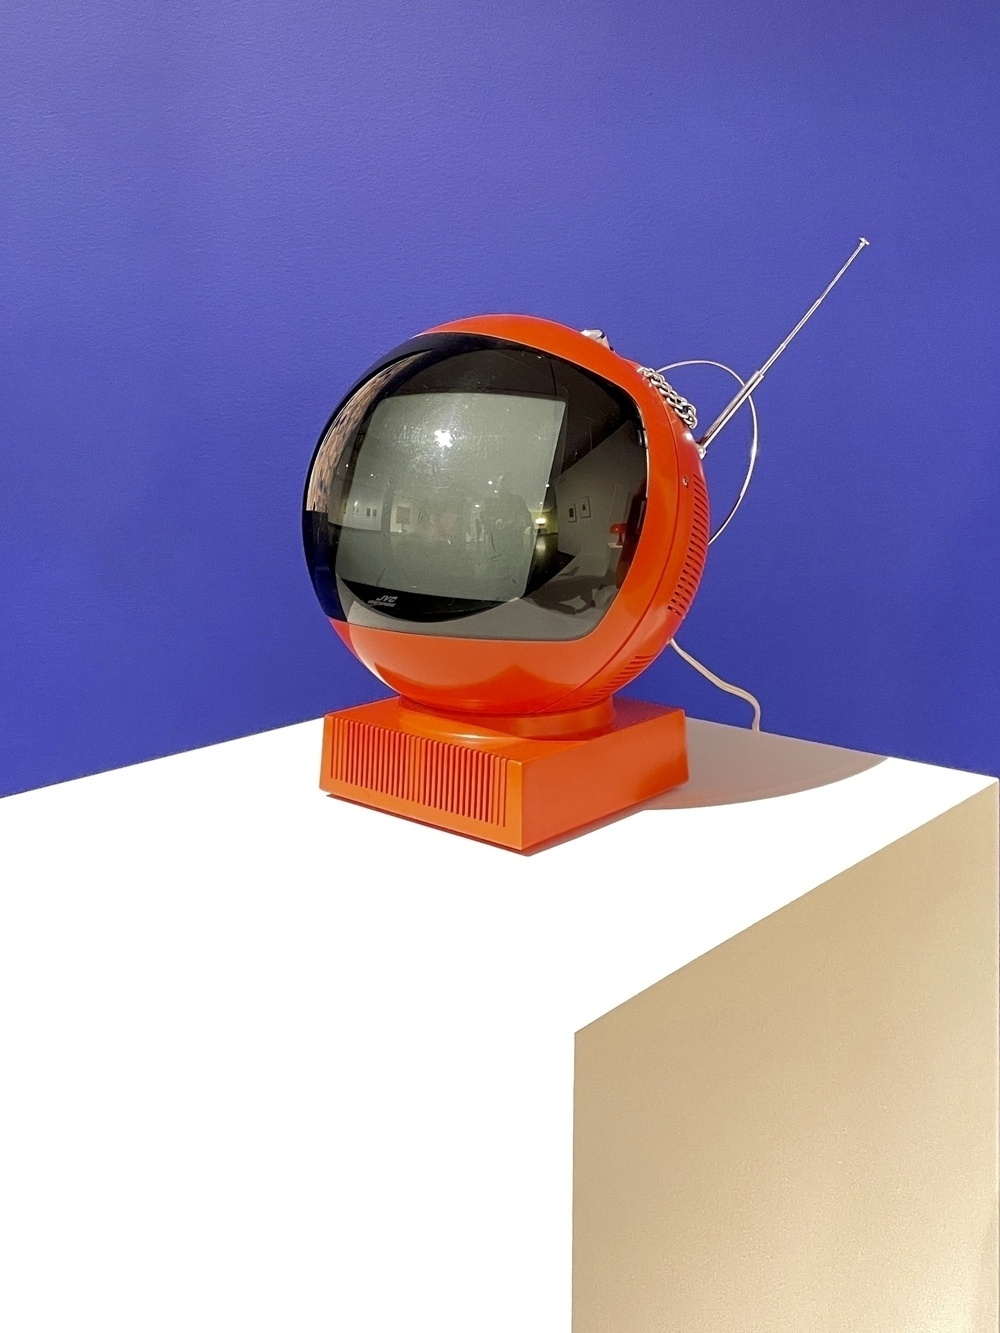 Red circular 1970’s television on a white platform against a blue background 